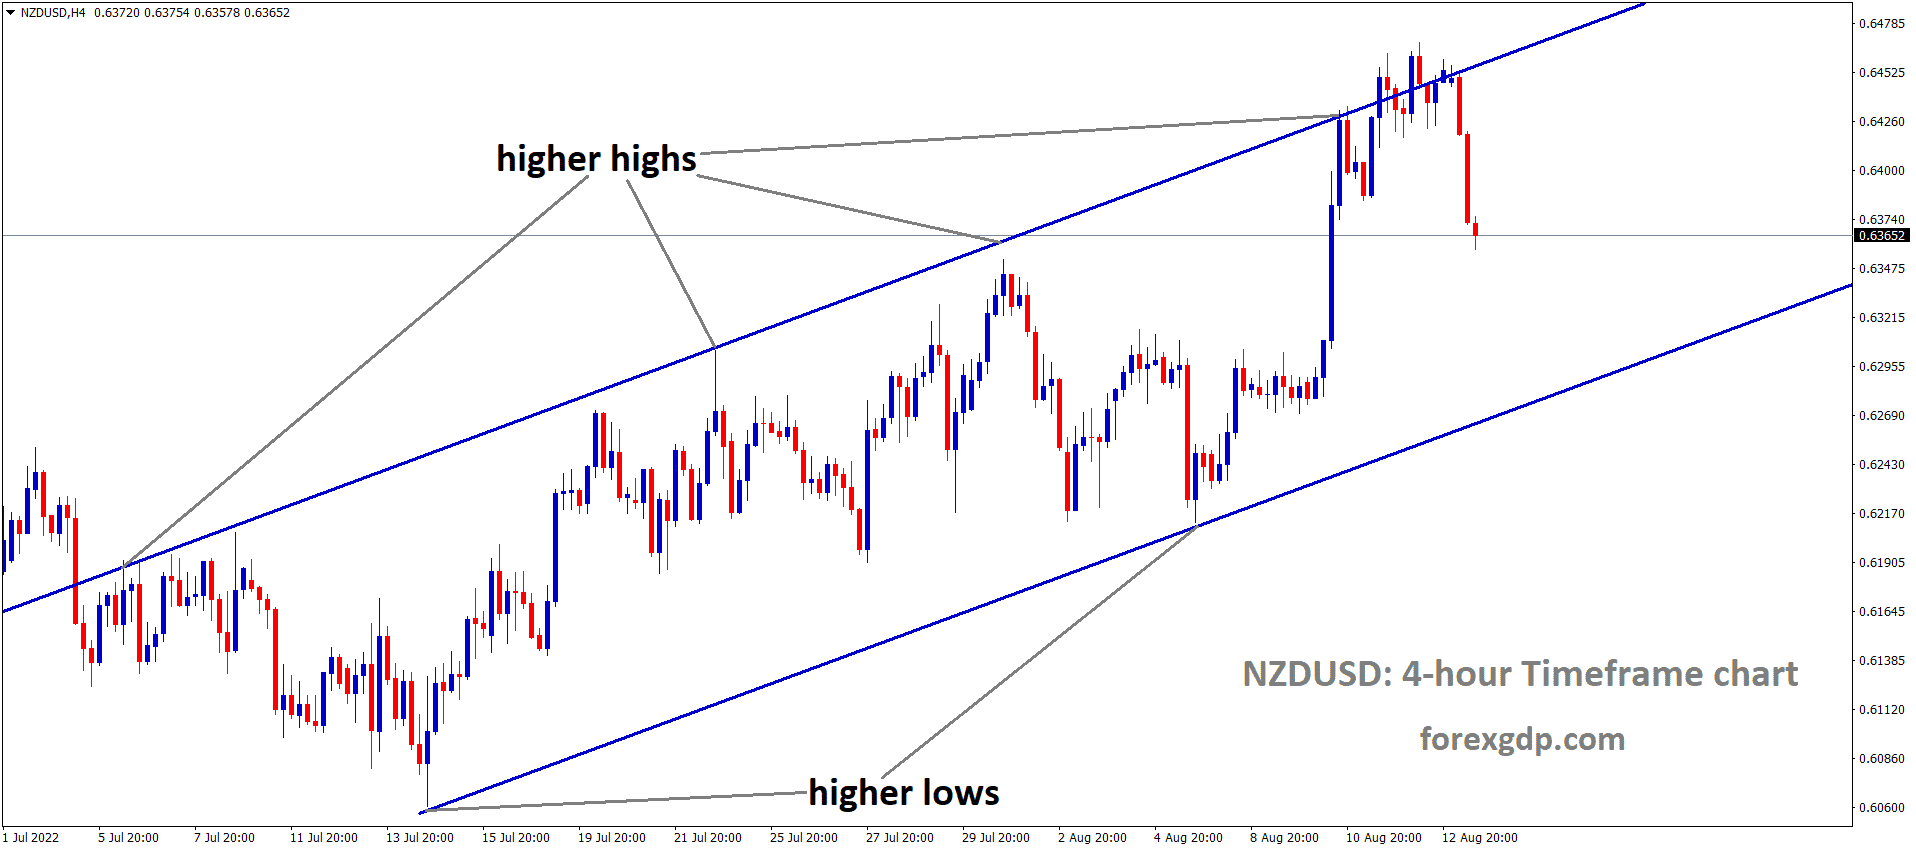 NZDUSD is moving in an Ascending channel and the market has fallen from the higher high area of the channel 1